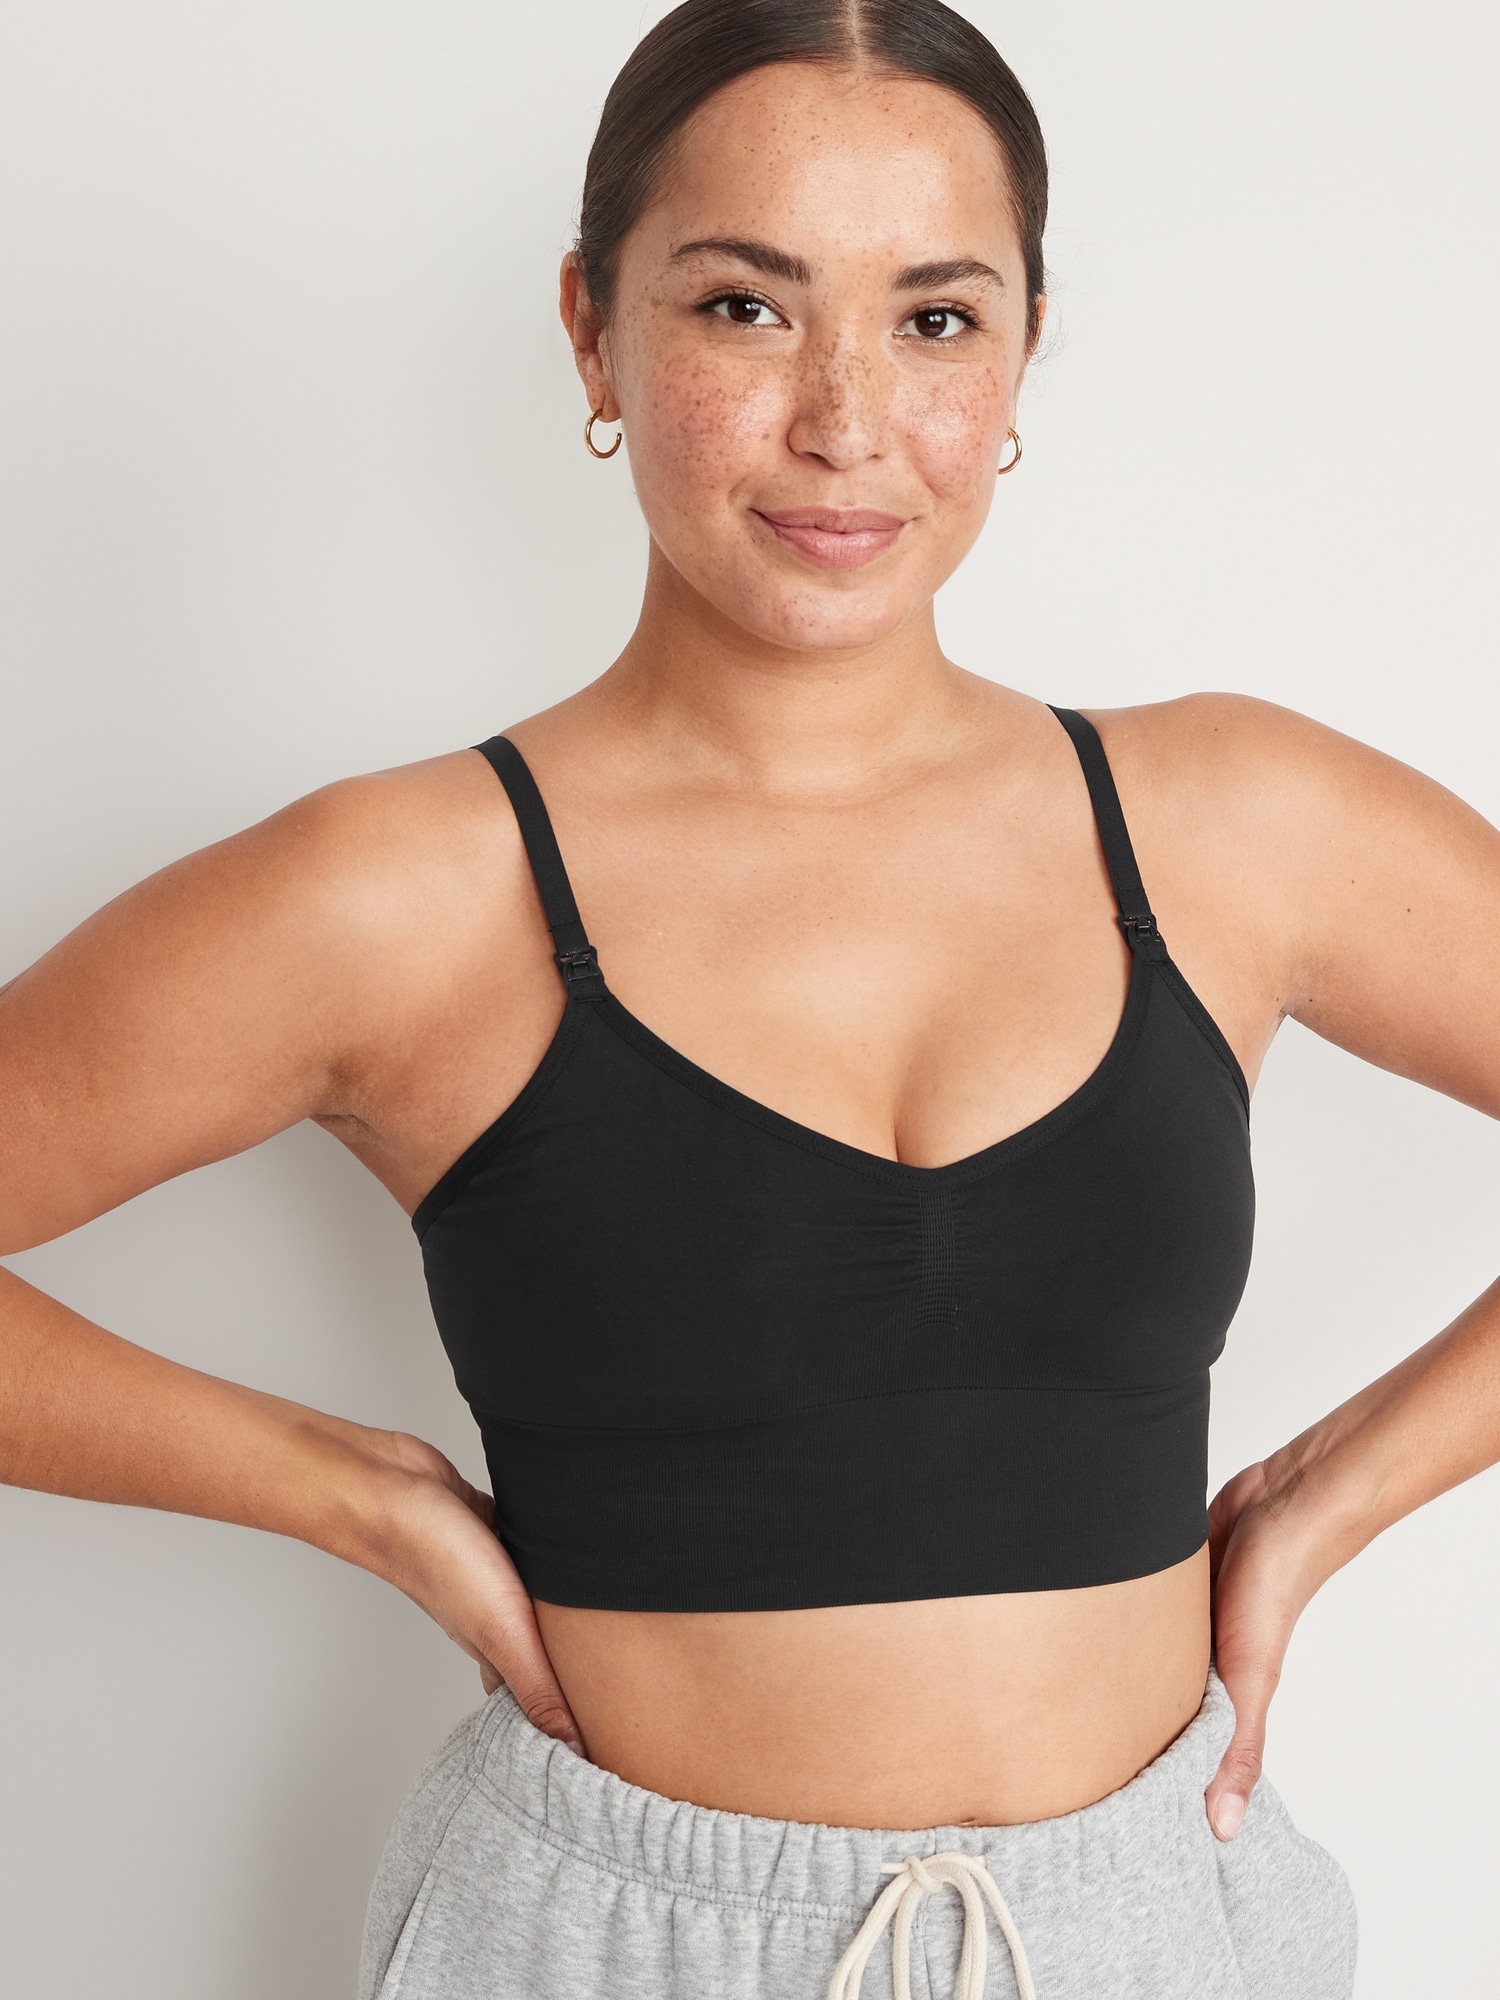 Old Navy Women's Maternity High Support Hands-Free Pumping Bra - Black - Size S